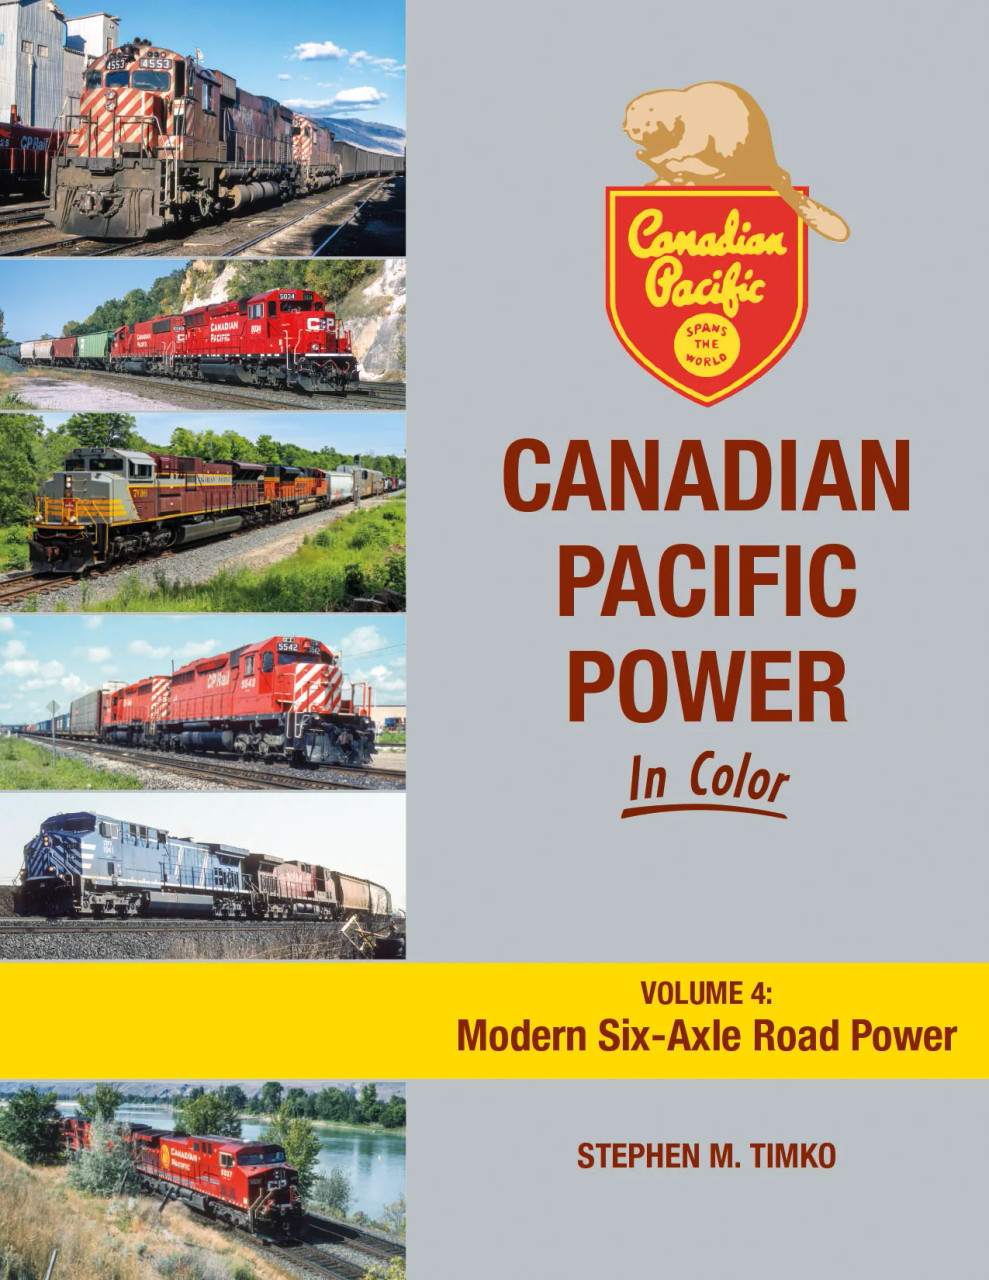 Morning Sun Books 1766 - Canadian Pacific Power In Color Volume 4: Modern Six-Axle Road Power - by Stephen M. Timko